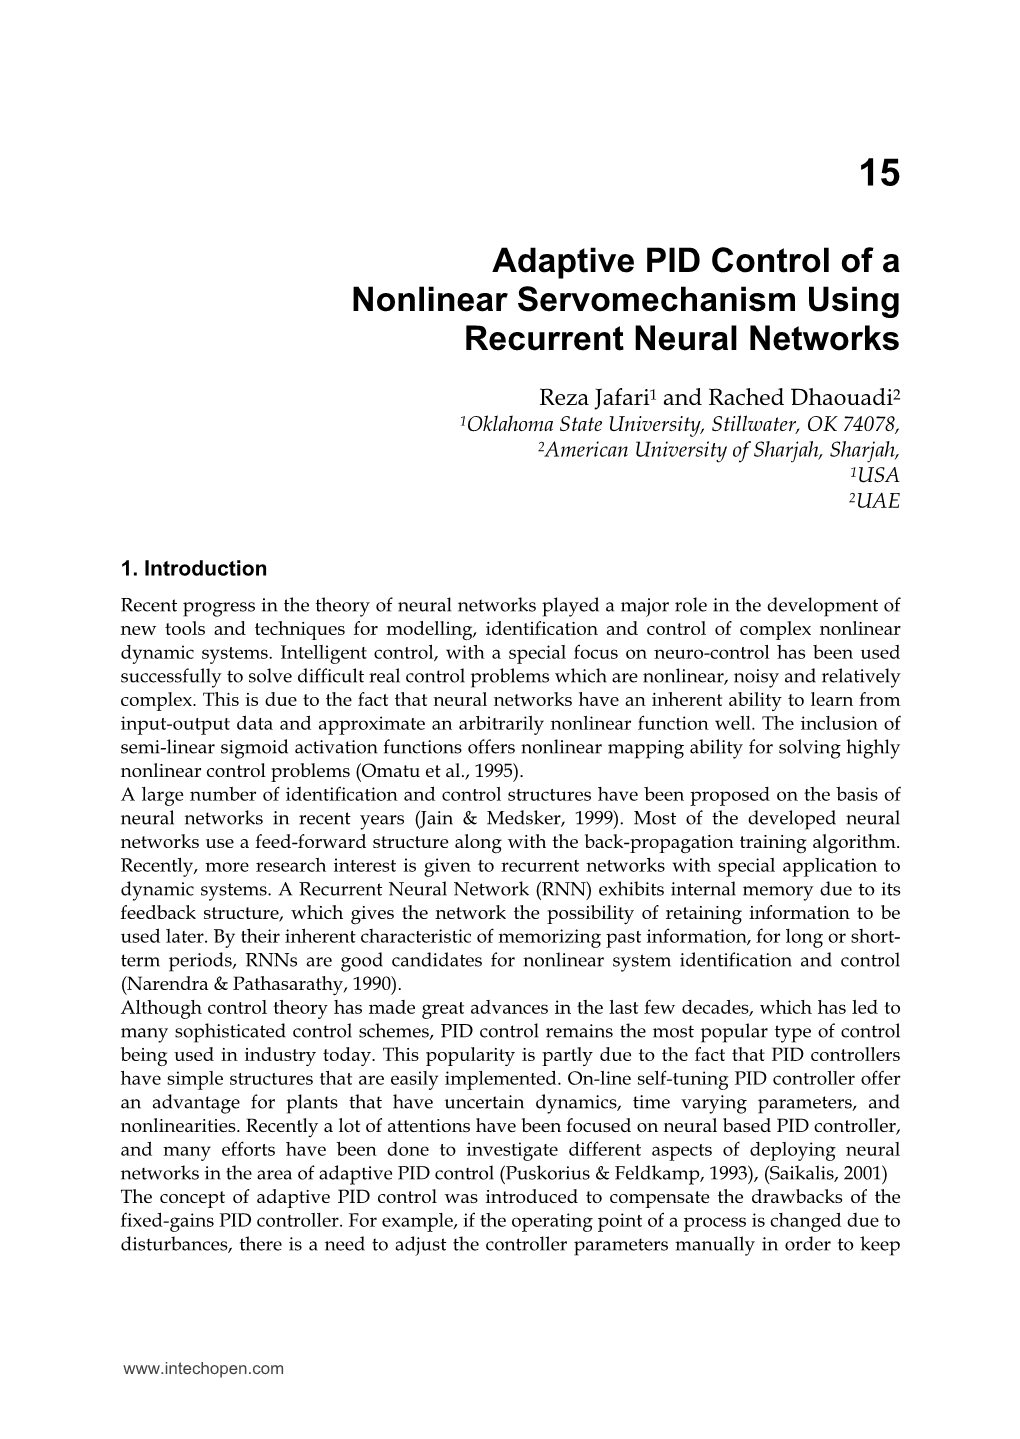 Adaptive PID Control of a Nonlinear Servomechanism Using Recurrent Neural Networks